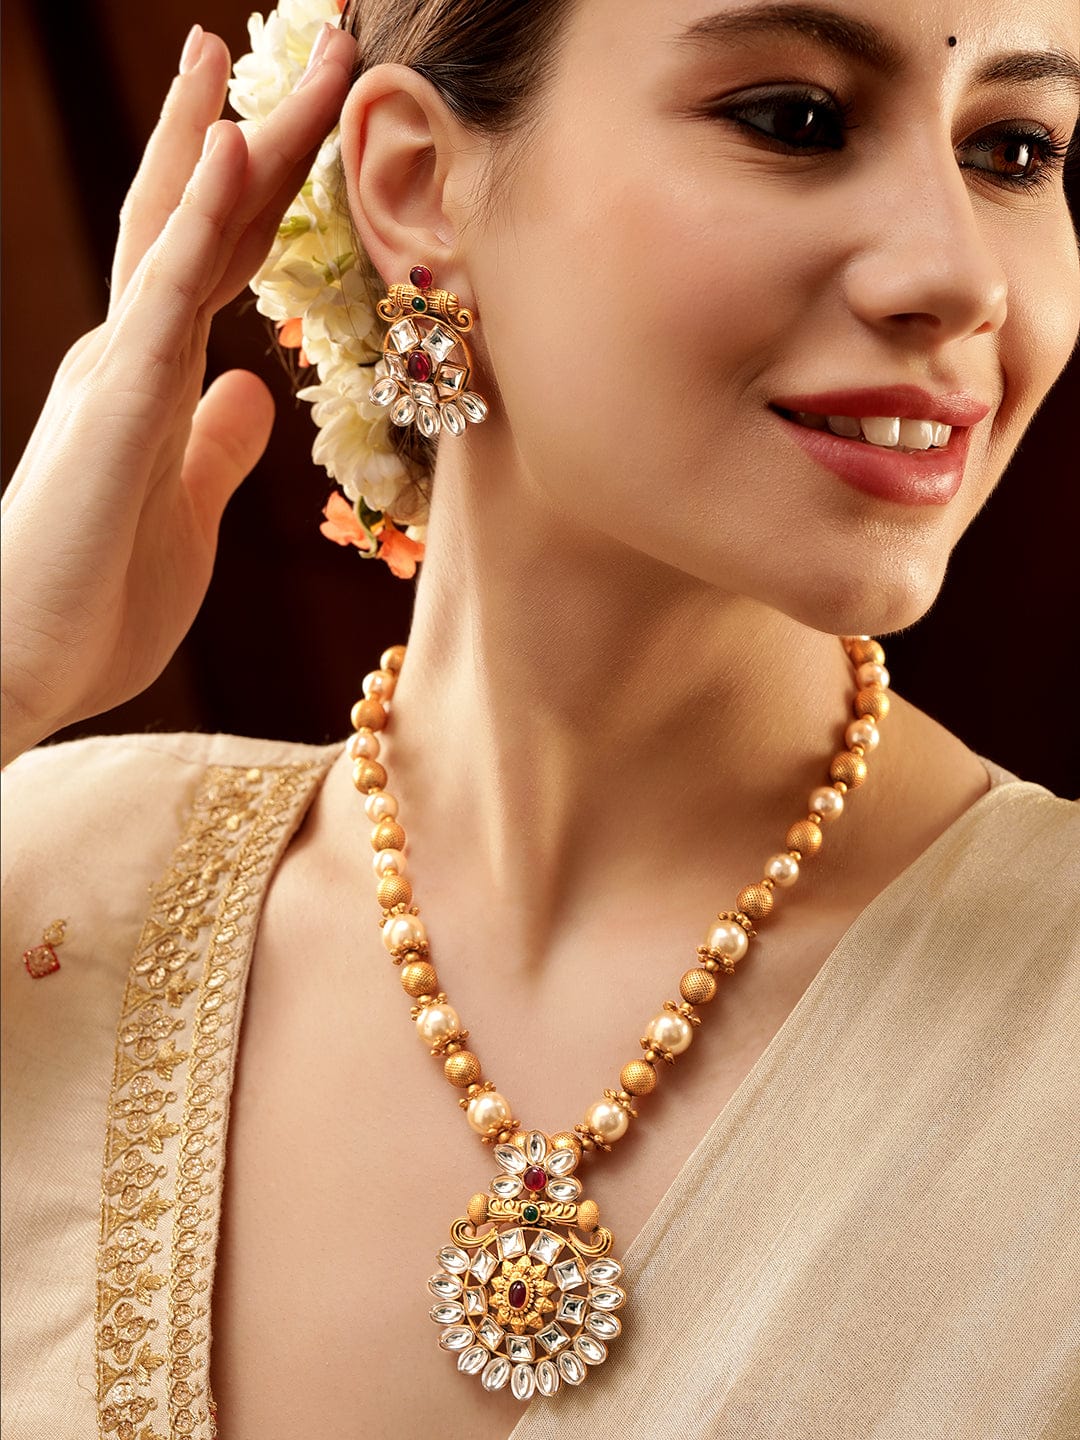 Rubans Gold-Toned Pendant with Dazzling Stones and Golden Off-White Pearls Chain Necklace Set Jewellery Sets